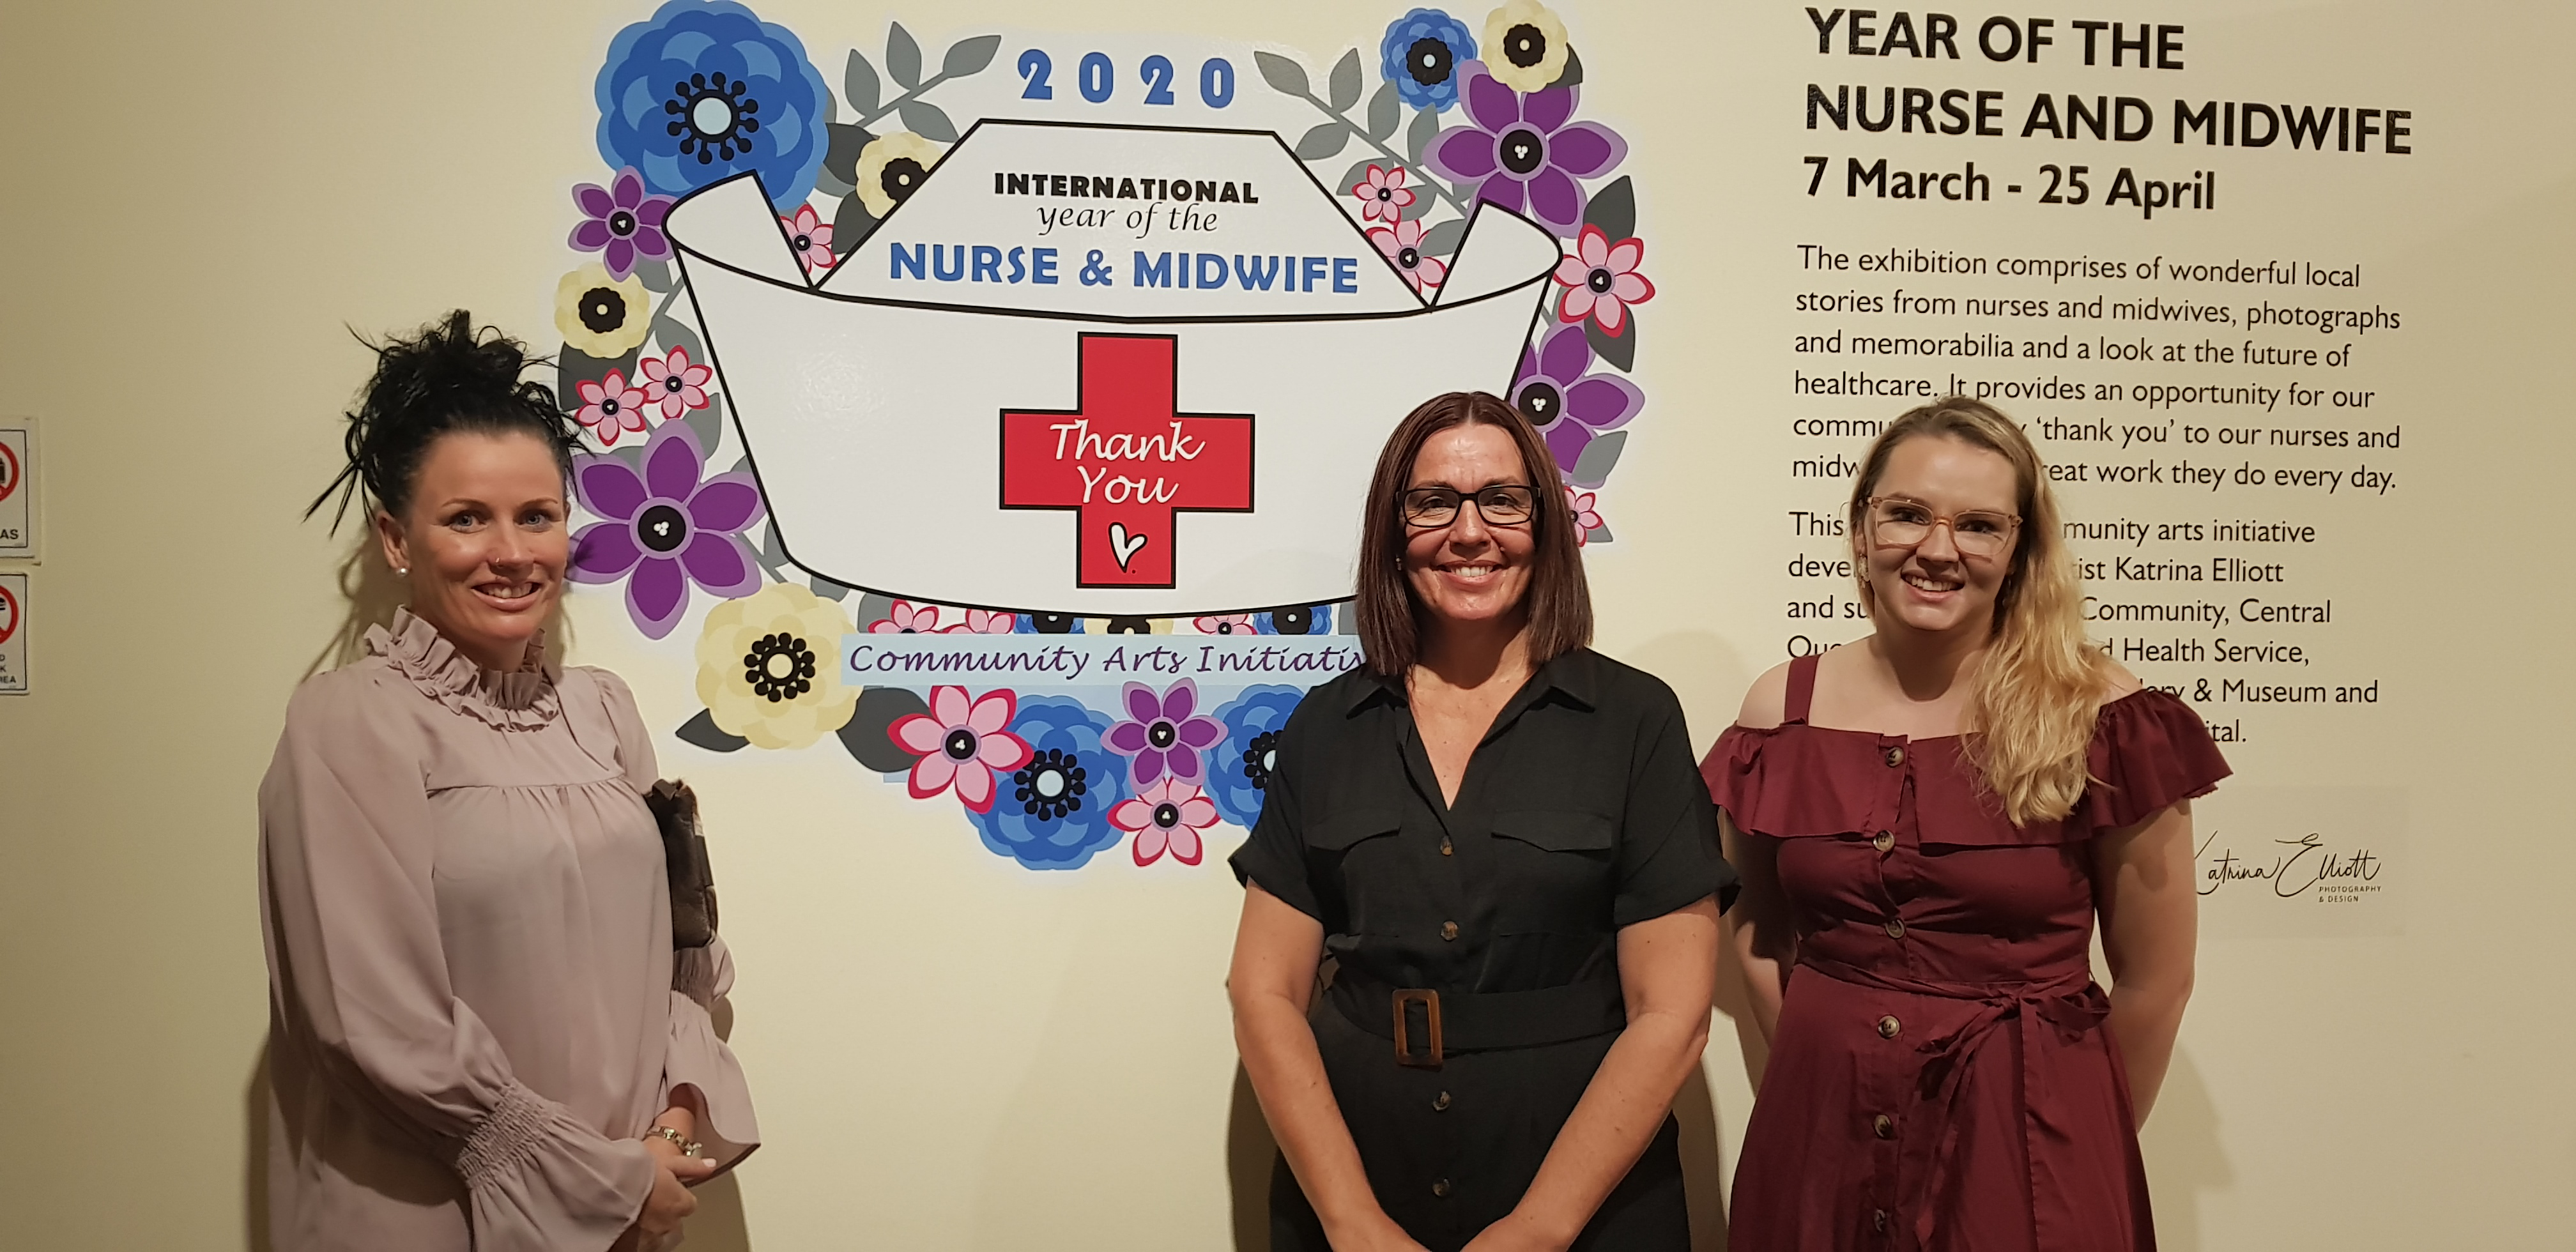 2020 International Year of the Nurse and Midwife